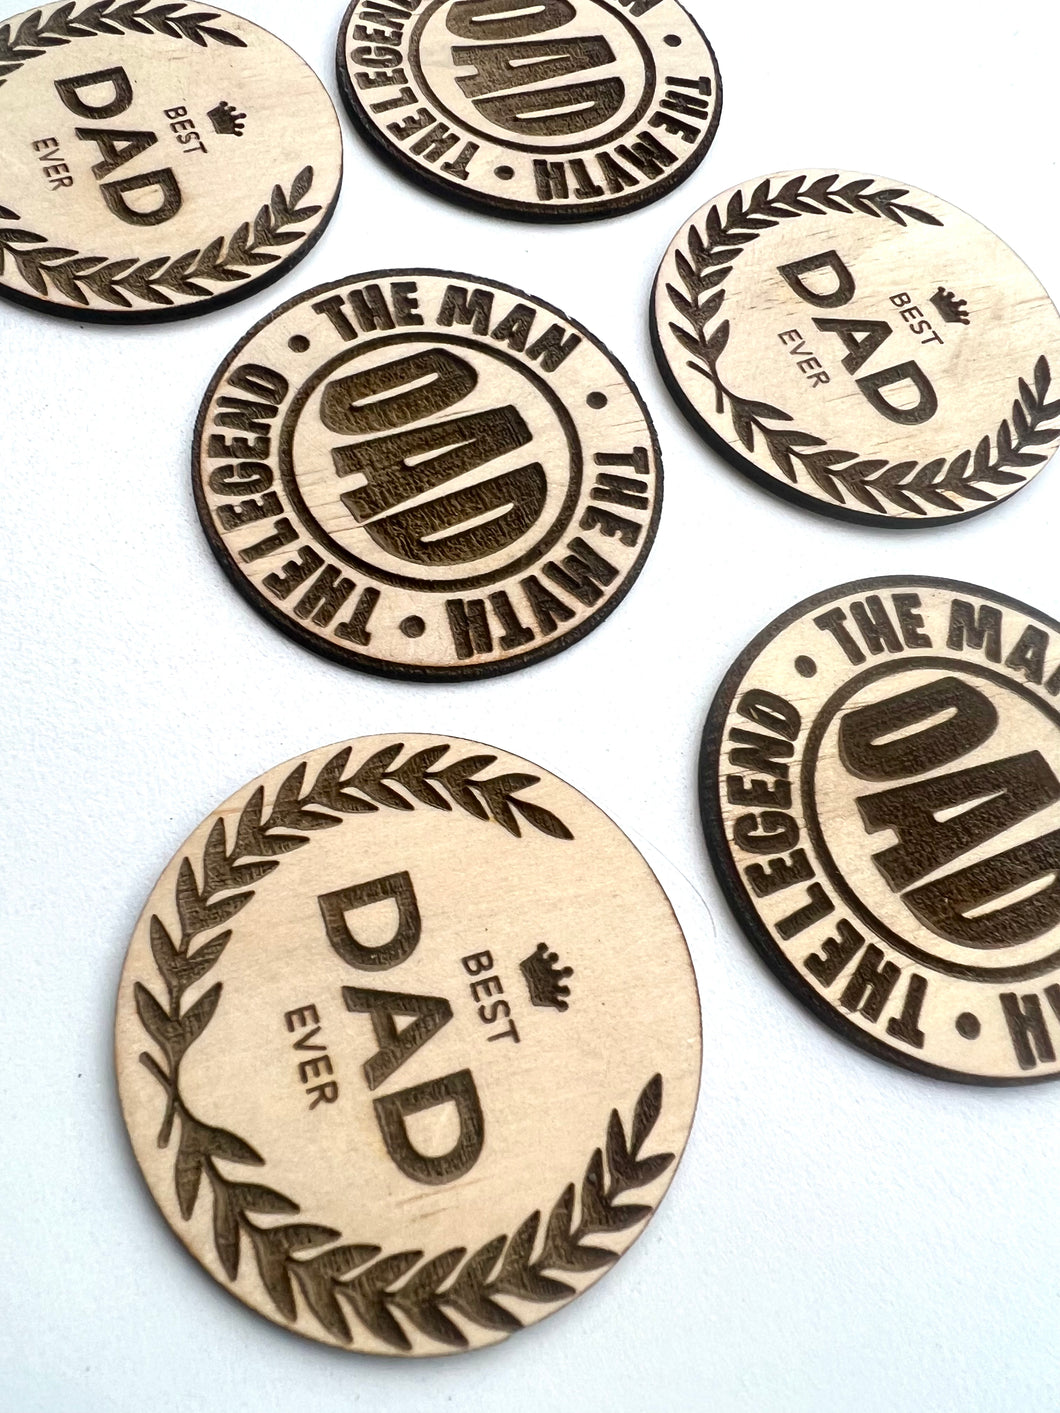 Fathers Day wooden Engraved cupcake/cake Plaques